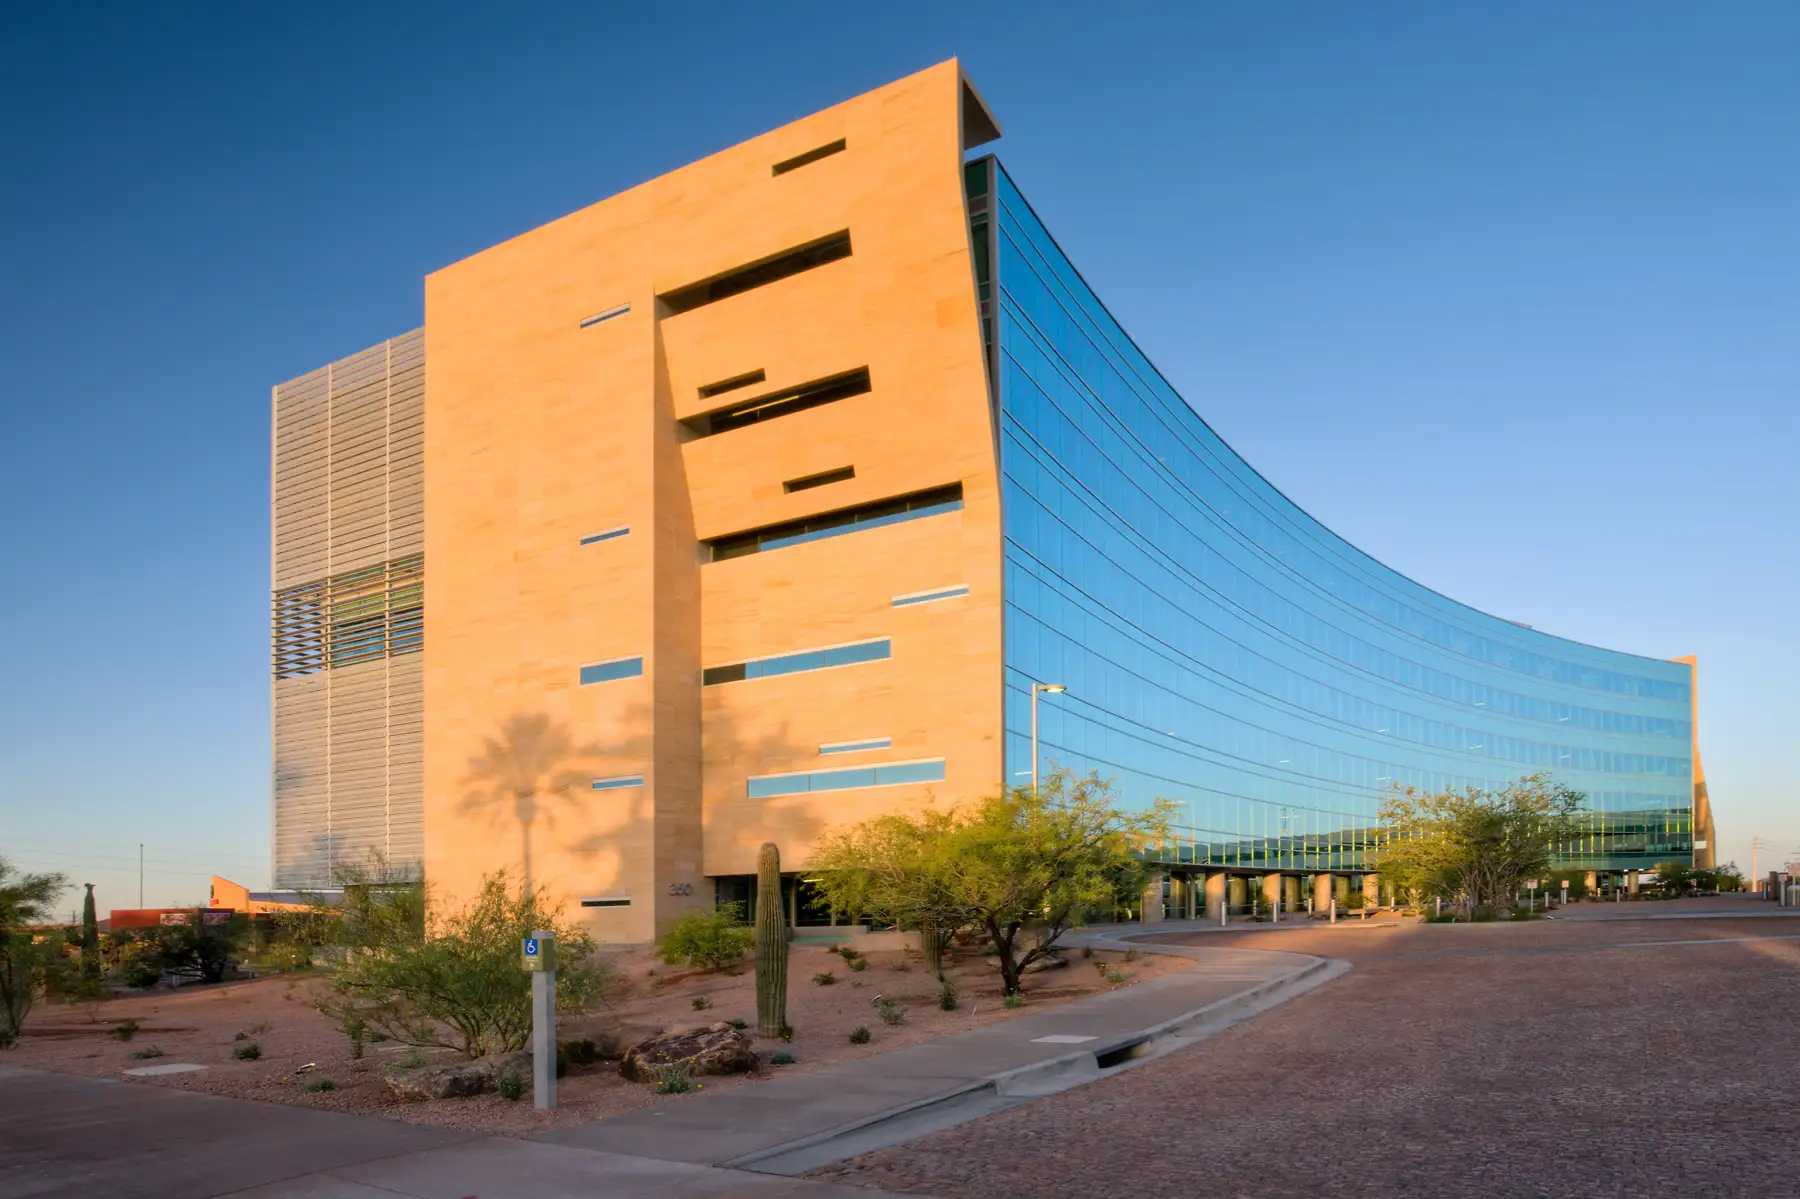 Background image of Tempe Campus Building